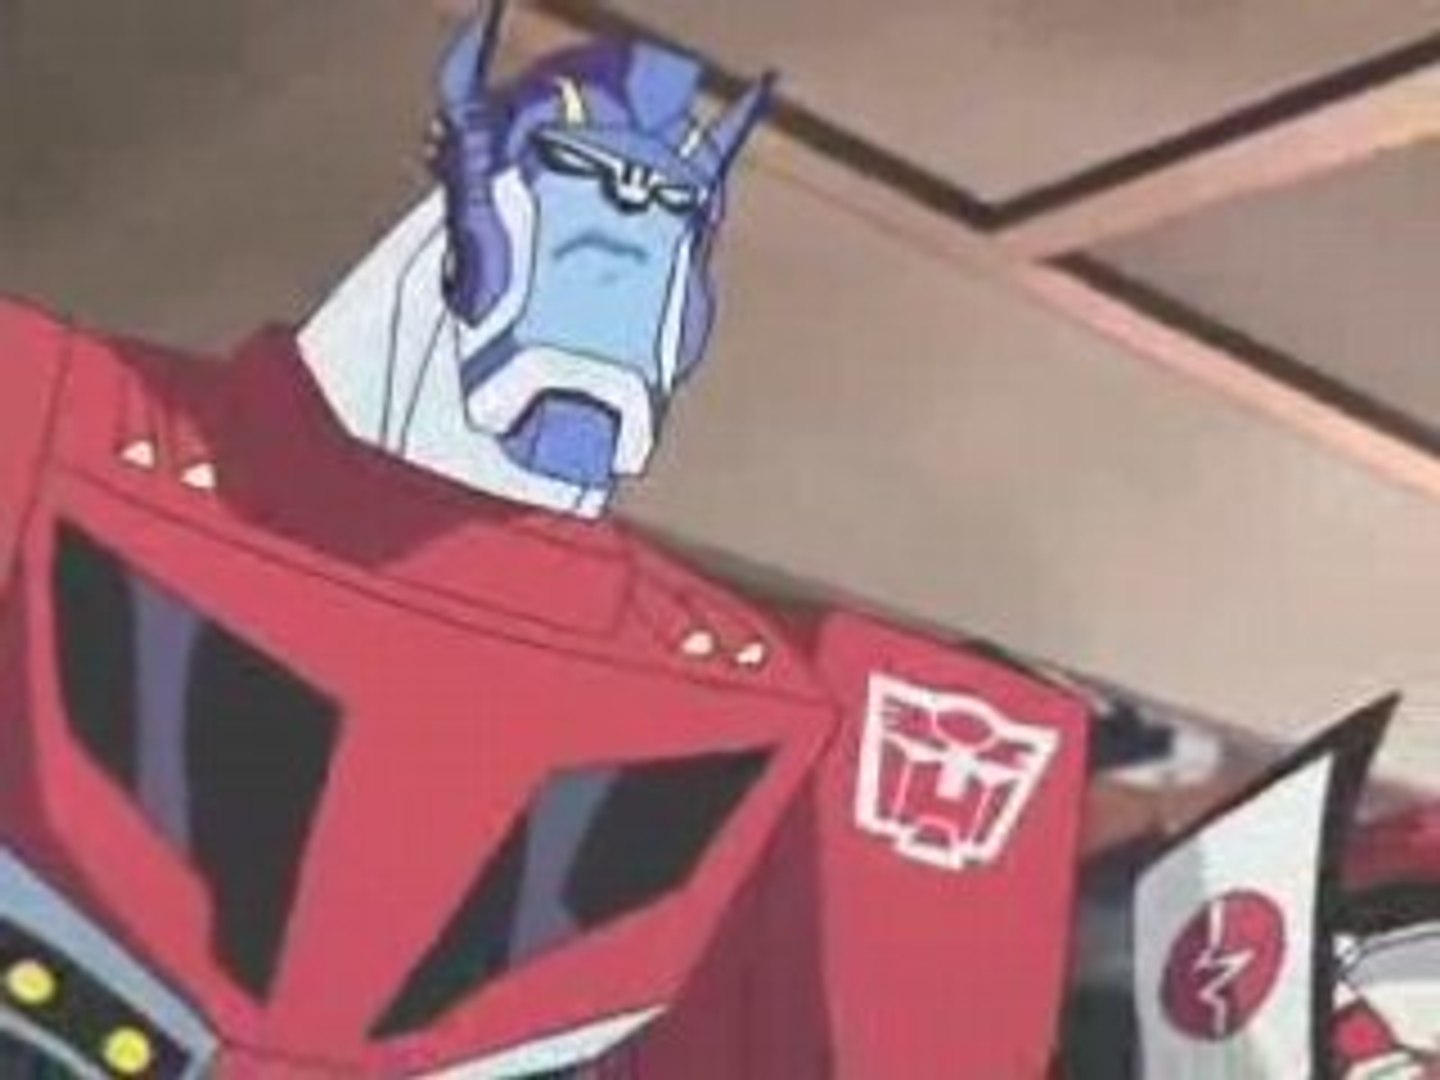 transformers animated a fistful of energon